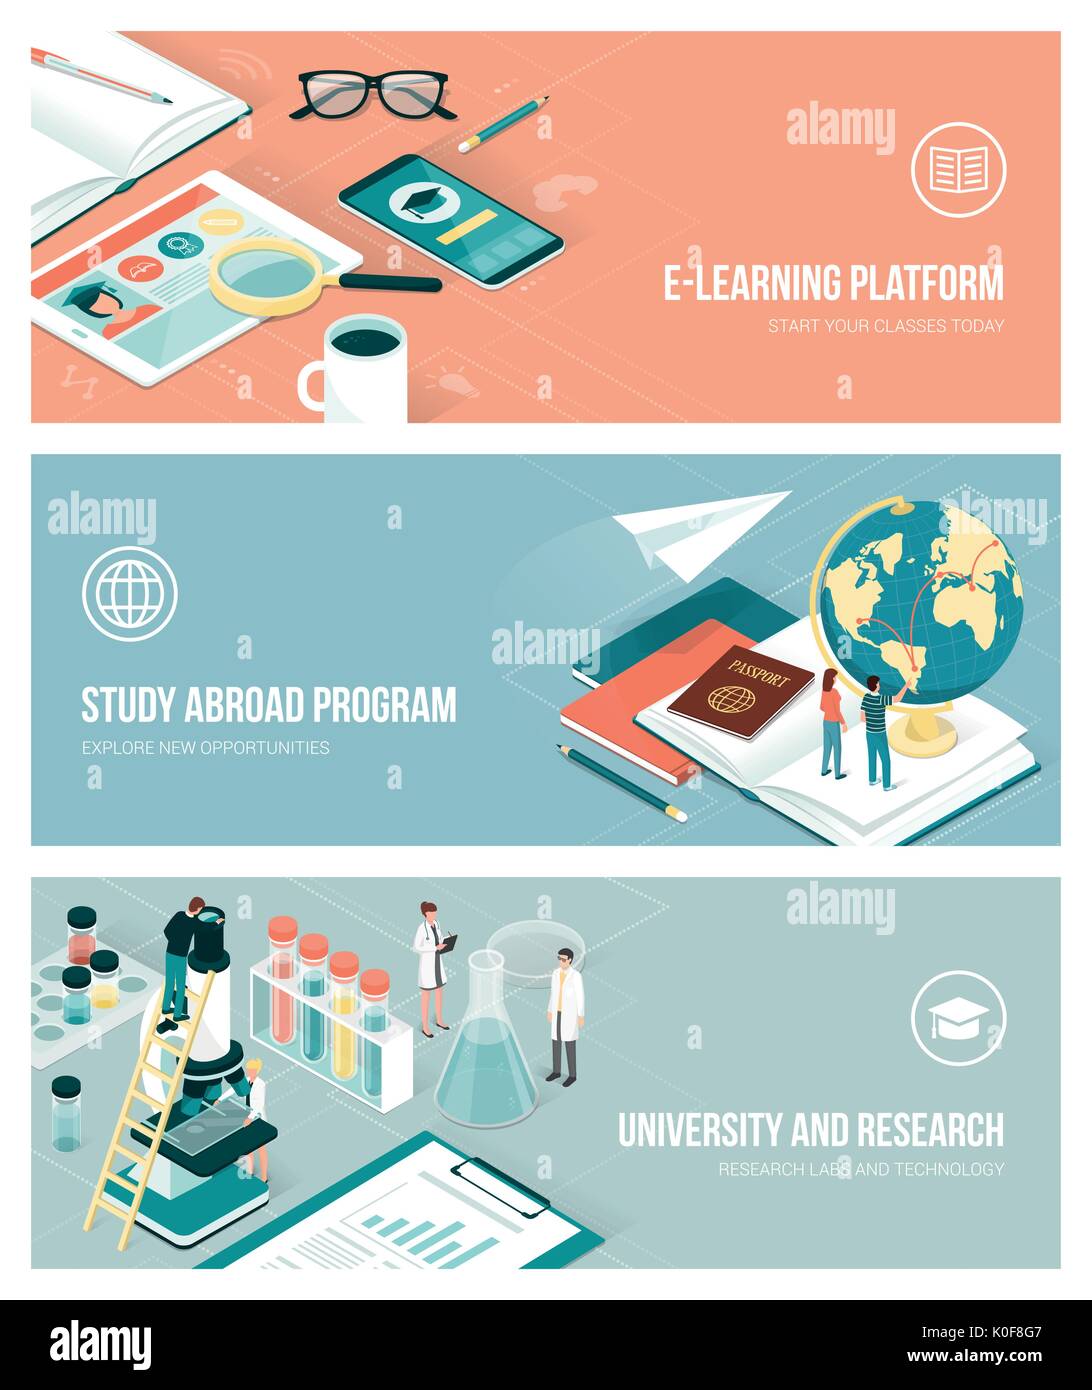 University, research and studying abroad concept with isometric people and objects, banners set Stock Vector